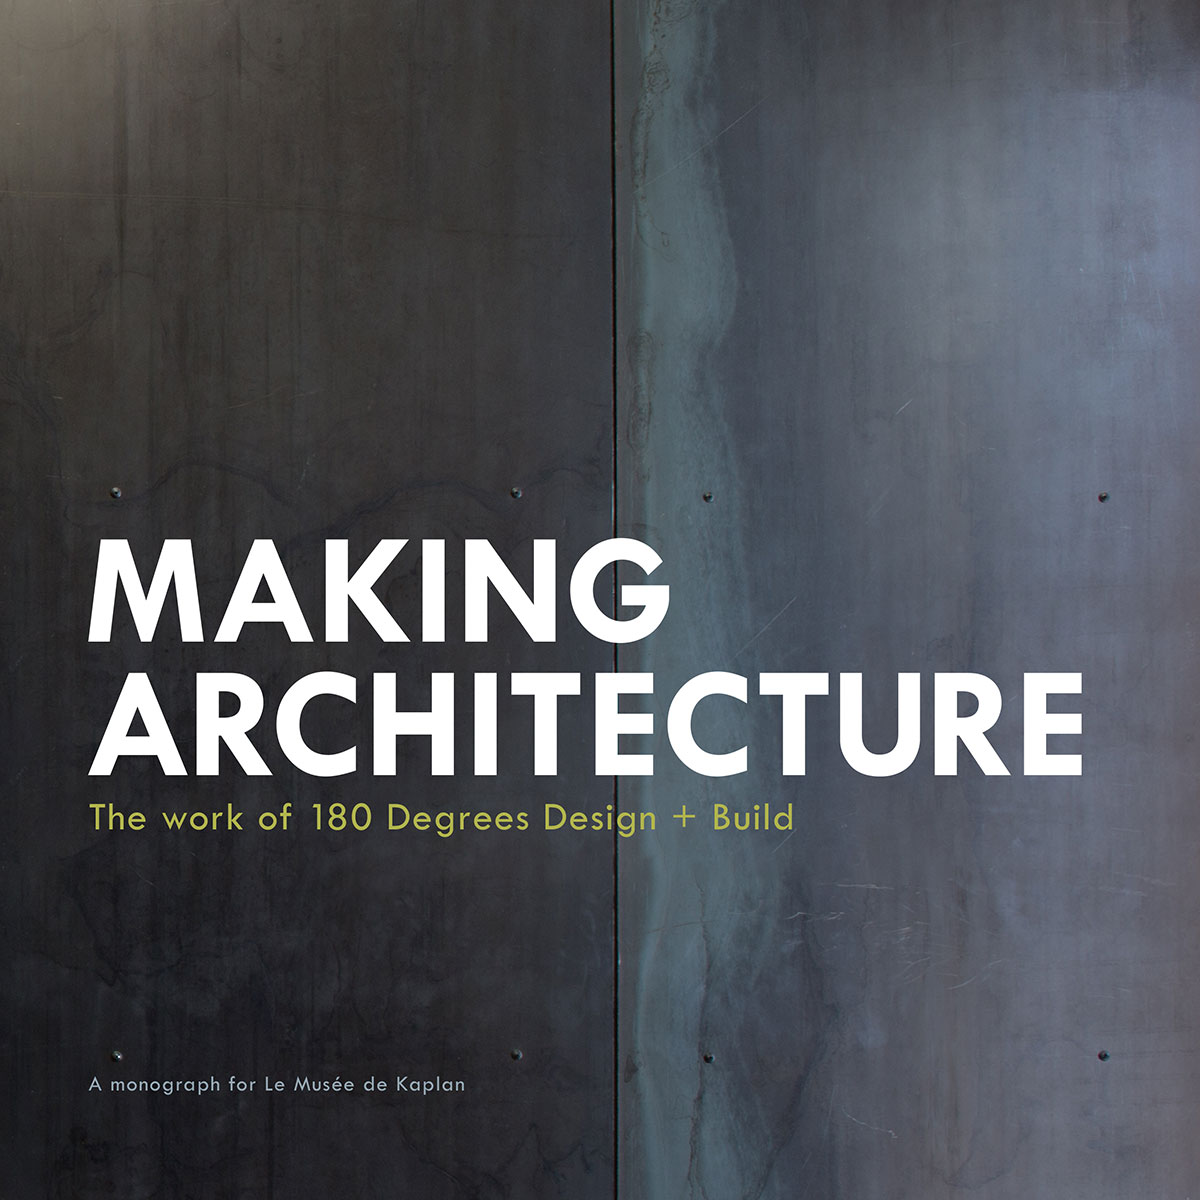 Making Architecture by 180 Degrees Design + Build